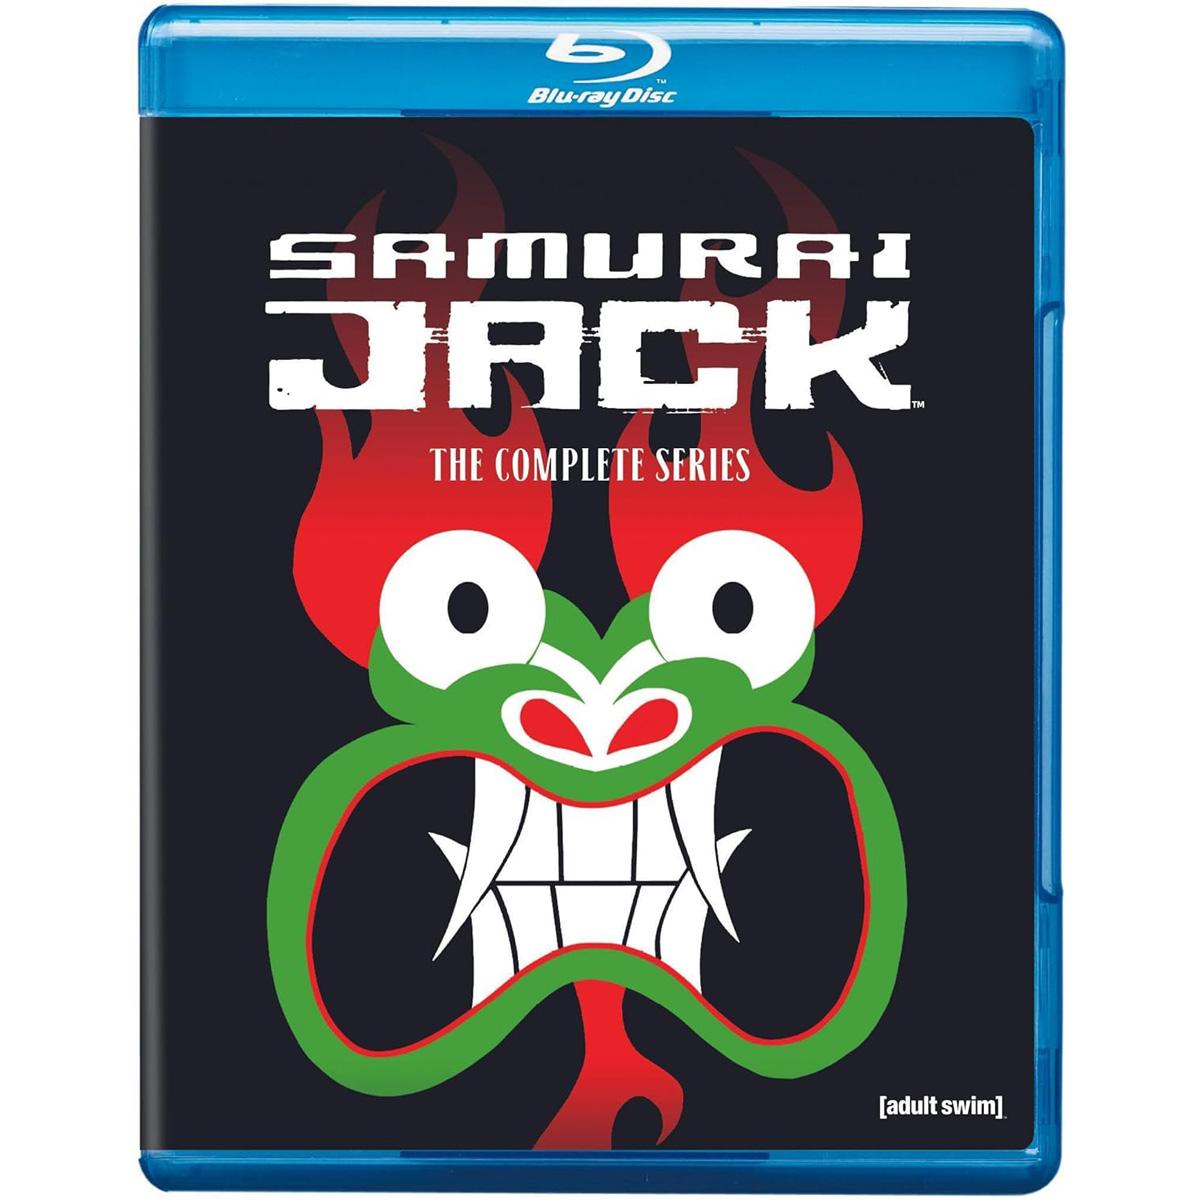 Samurai Jack The Complete Series Blu-ray for $29.99 Shipped